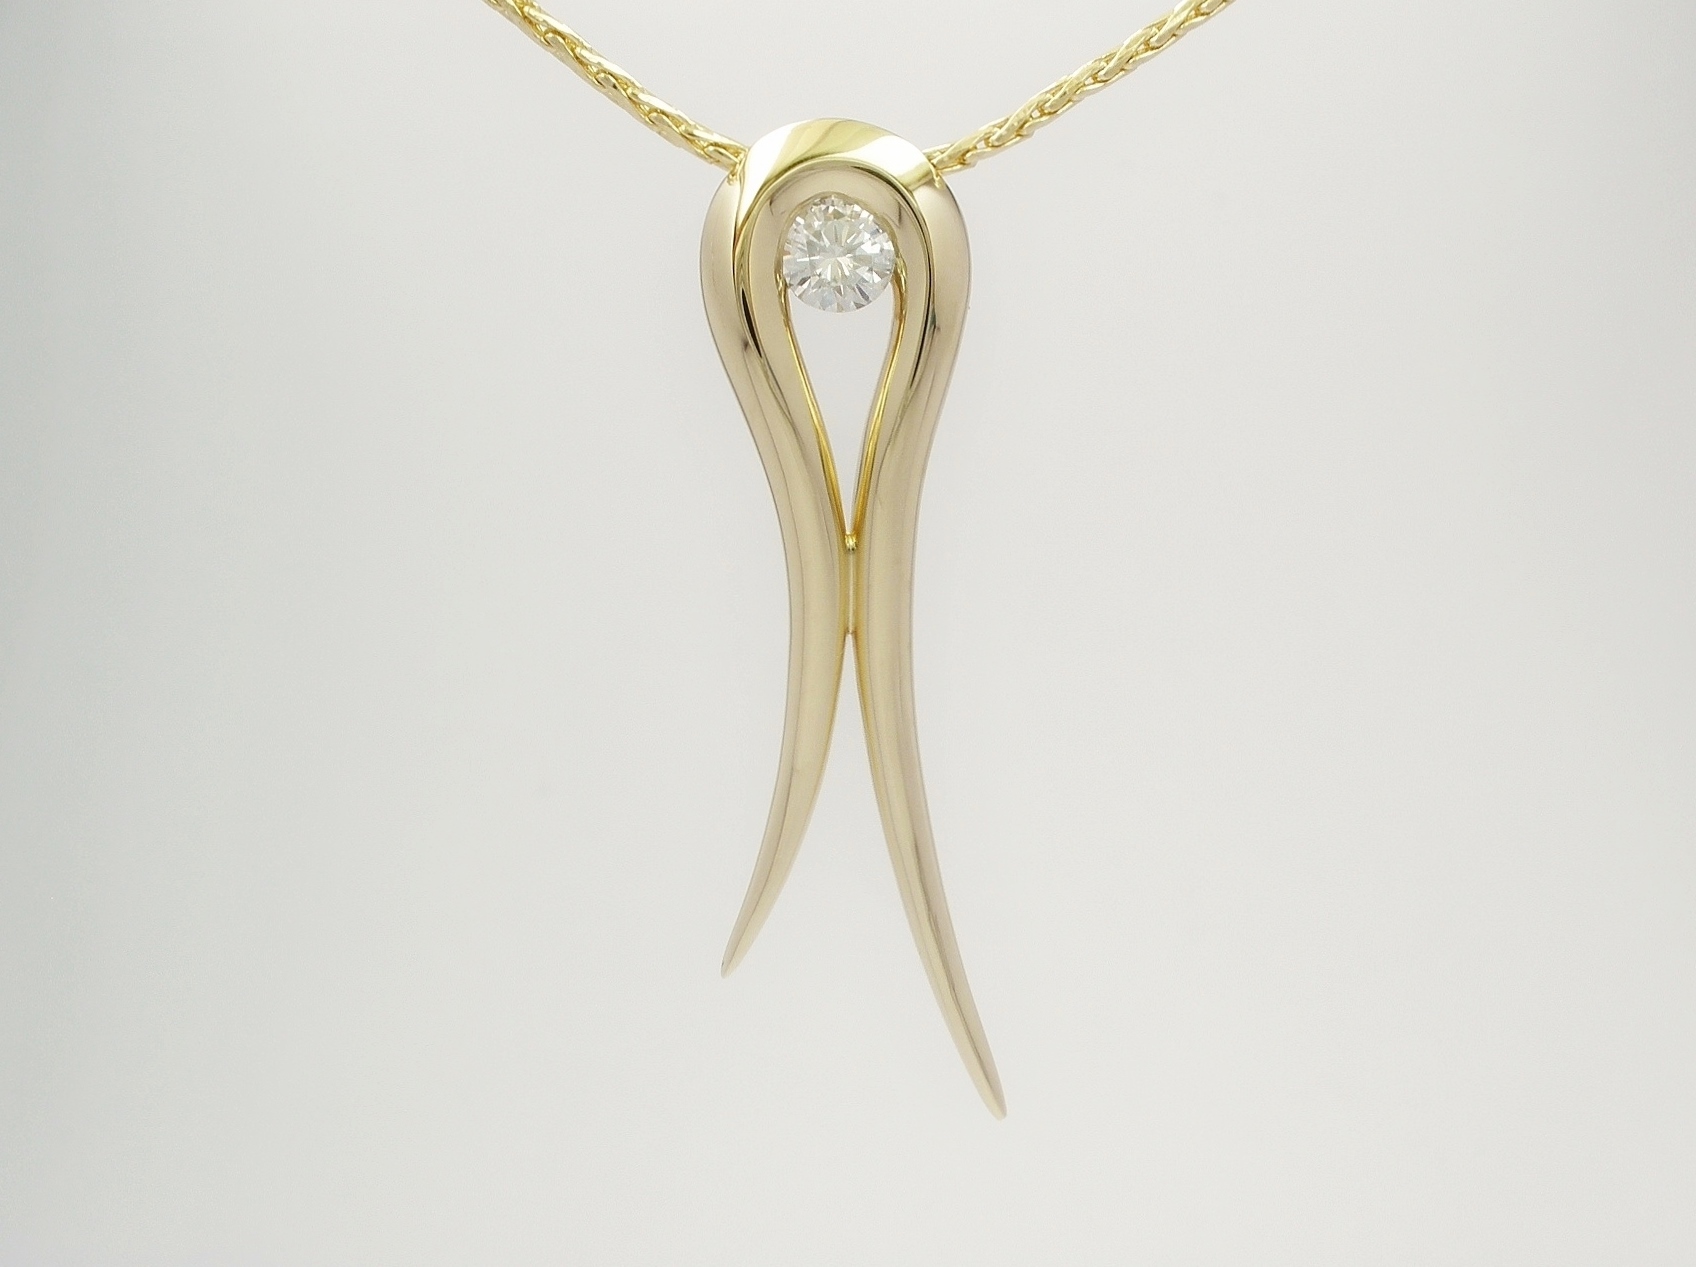 A single round brilliant cut diamond set in an 18ct. yellow gold tapered loop pendant.